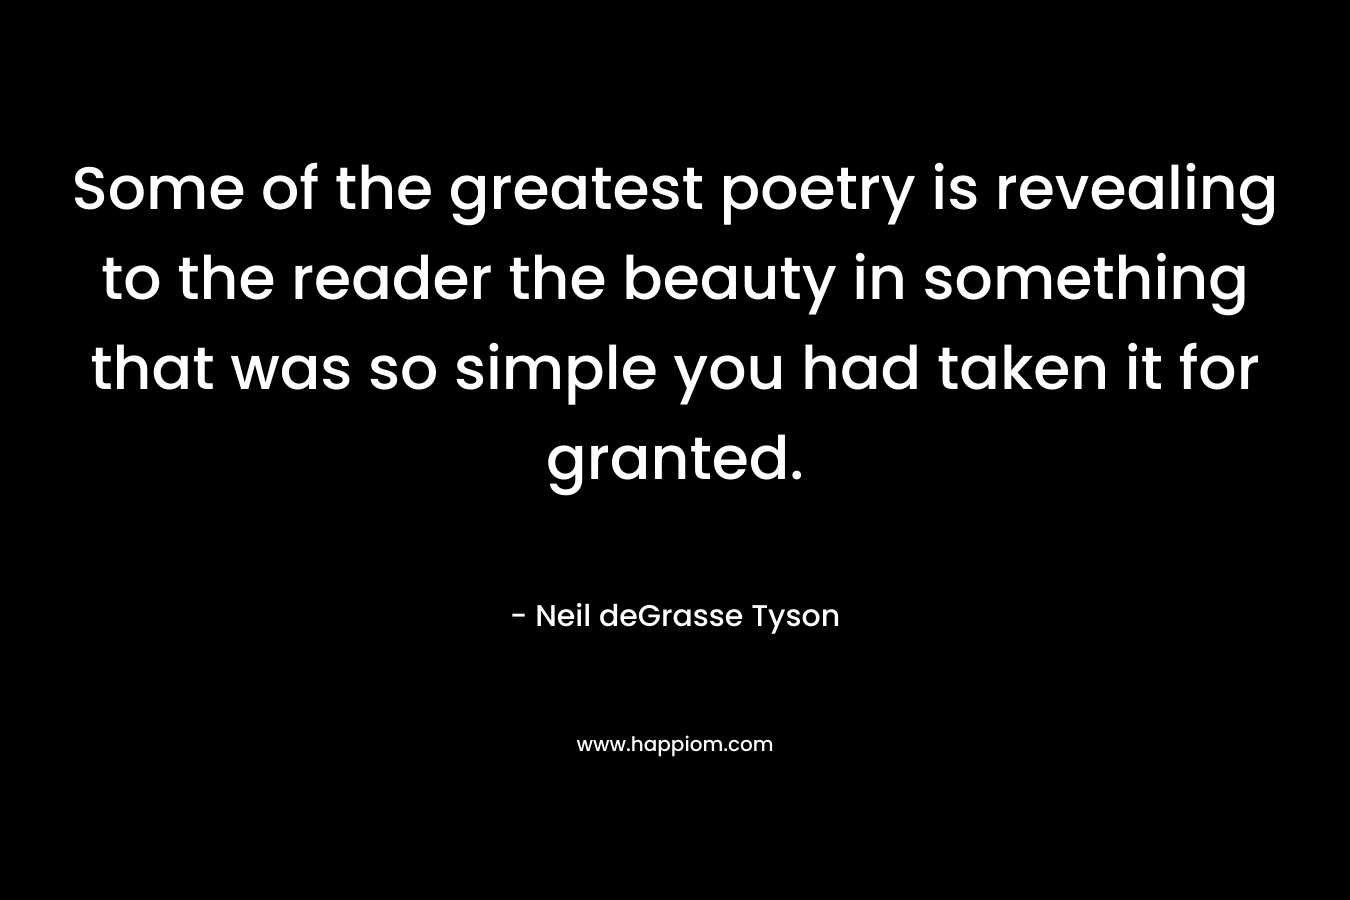 Some of the greatest poetry is revealing to the reader the beauty in something that was so simple you had taken it for granted. – Neil deGrasse Tyson